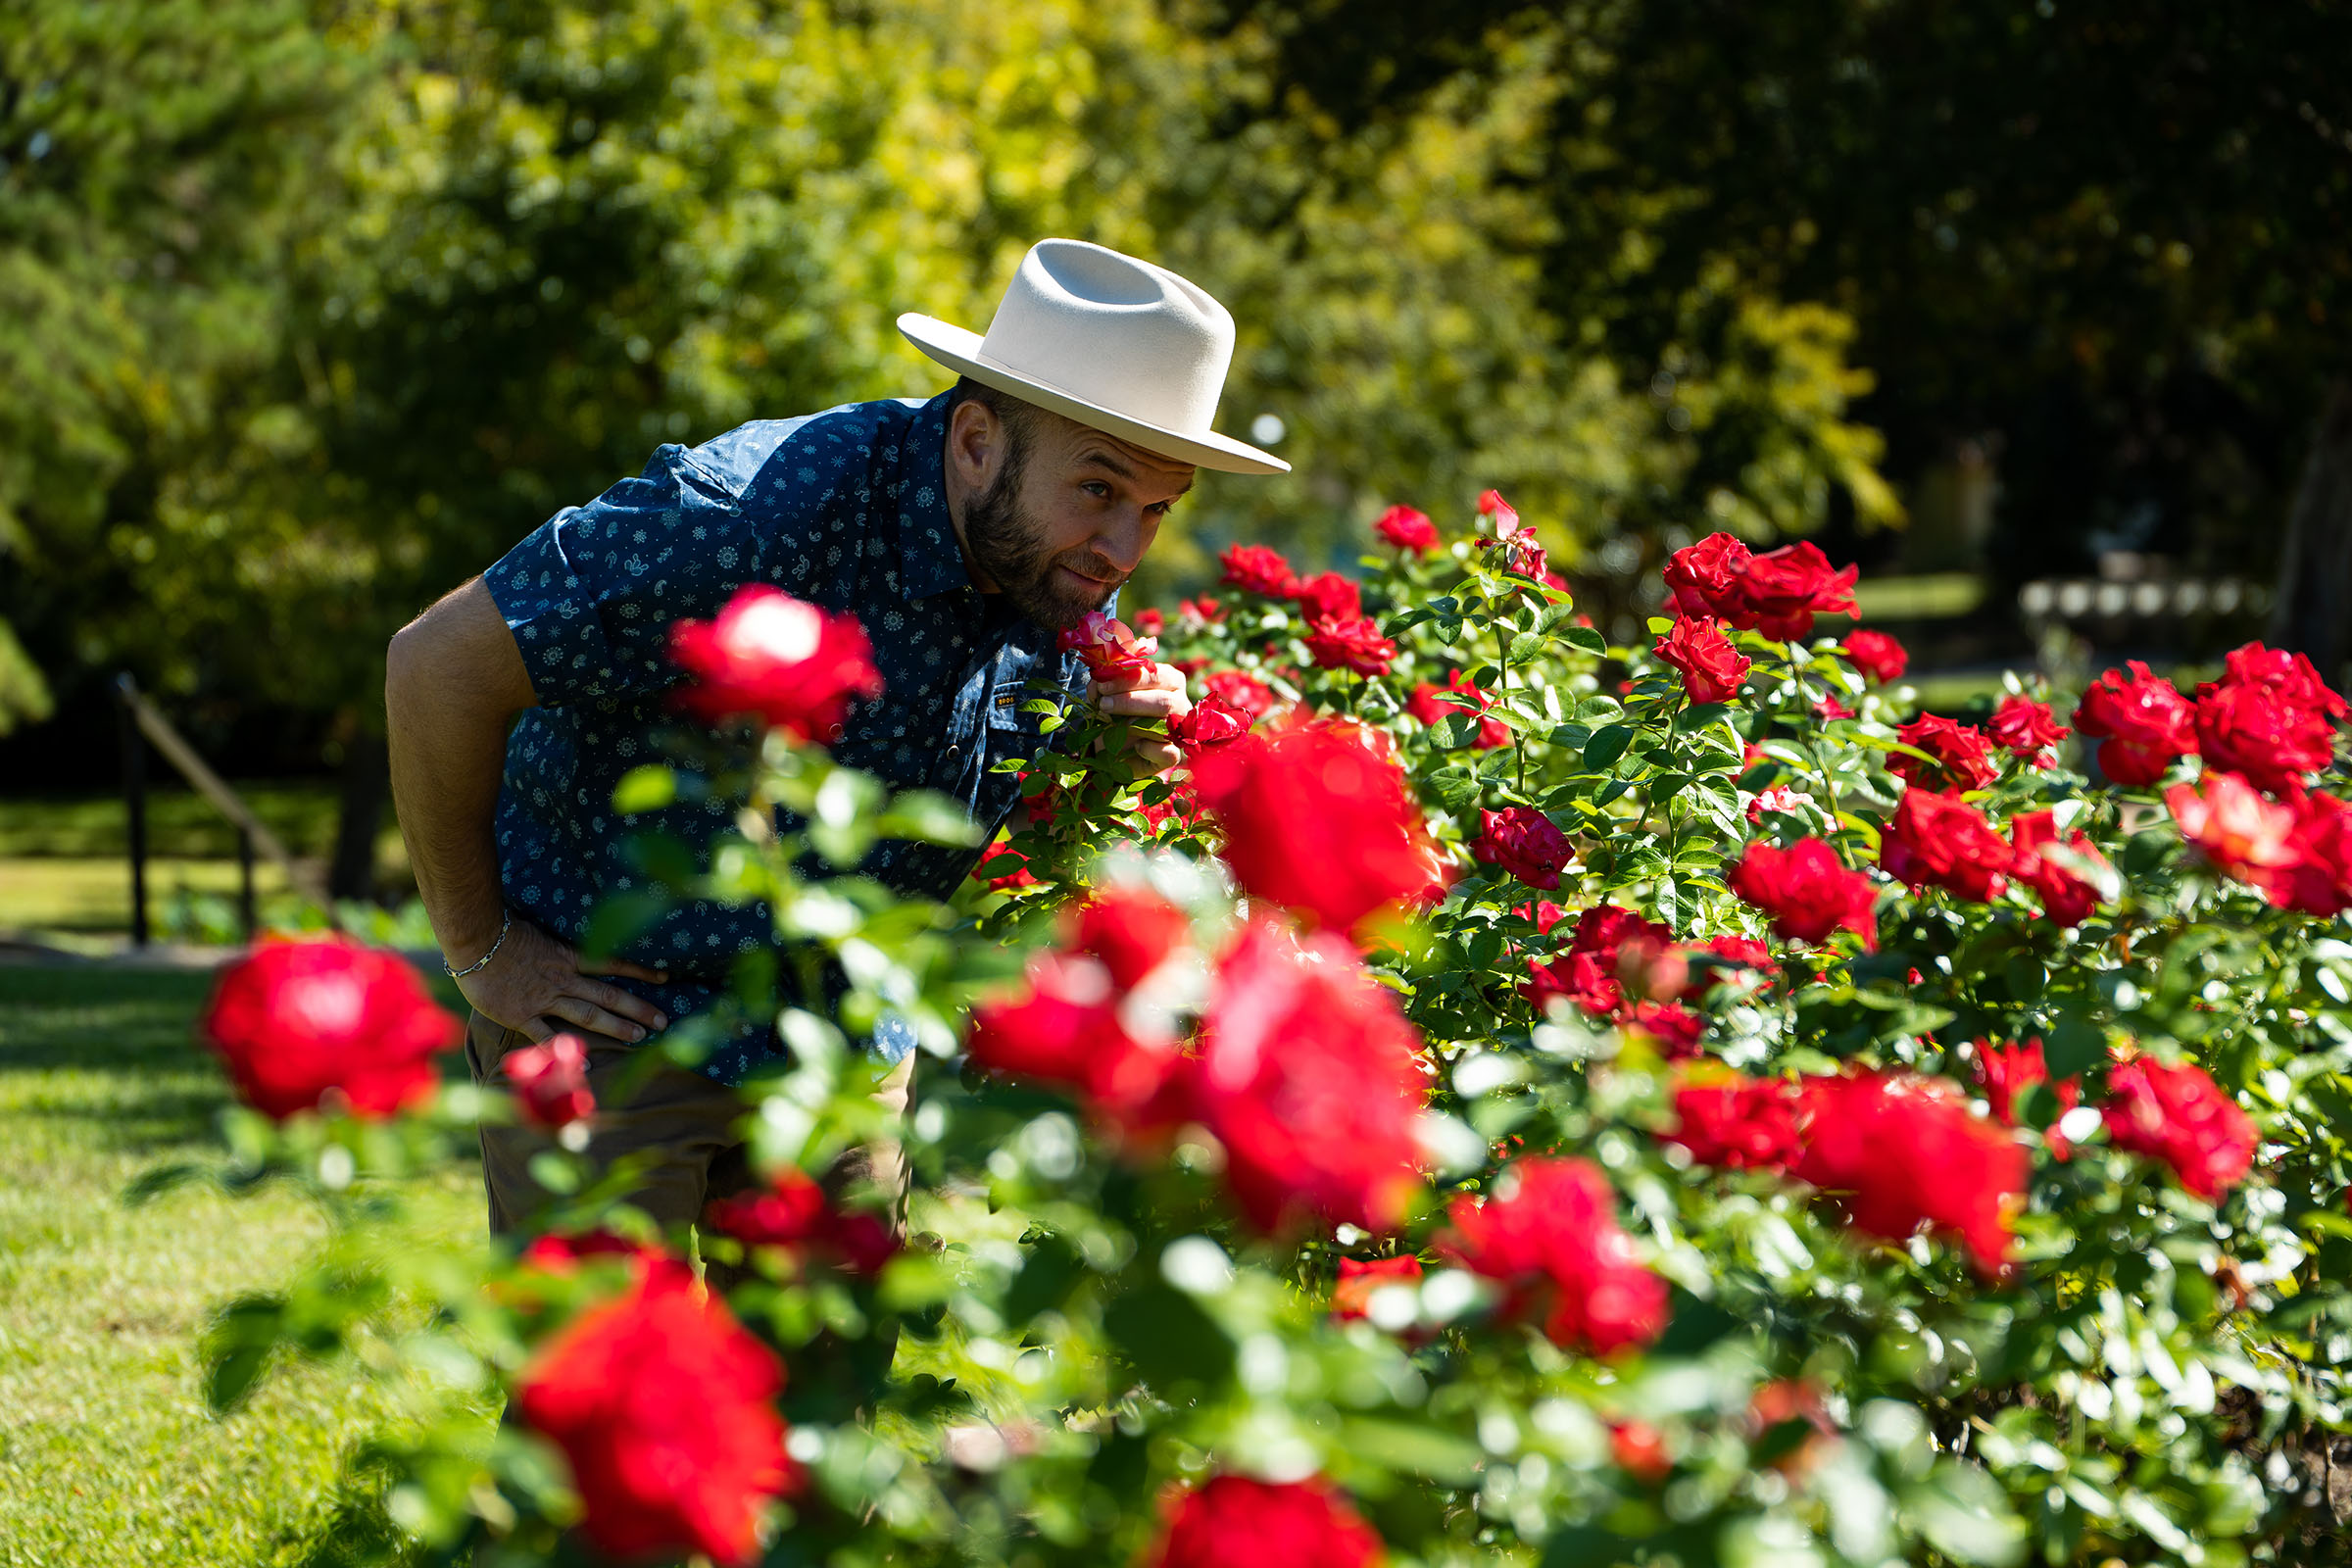 The Daytripper, Chet Garner, stops to smell the roses in Tyler Texas